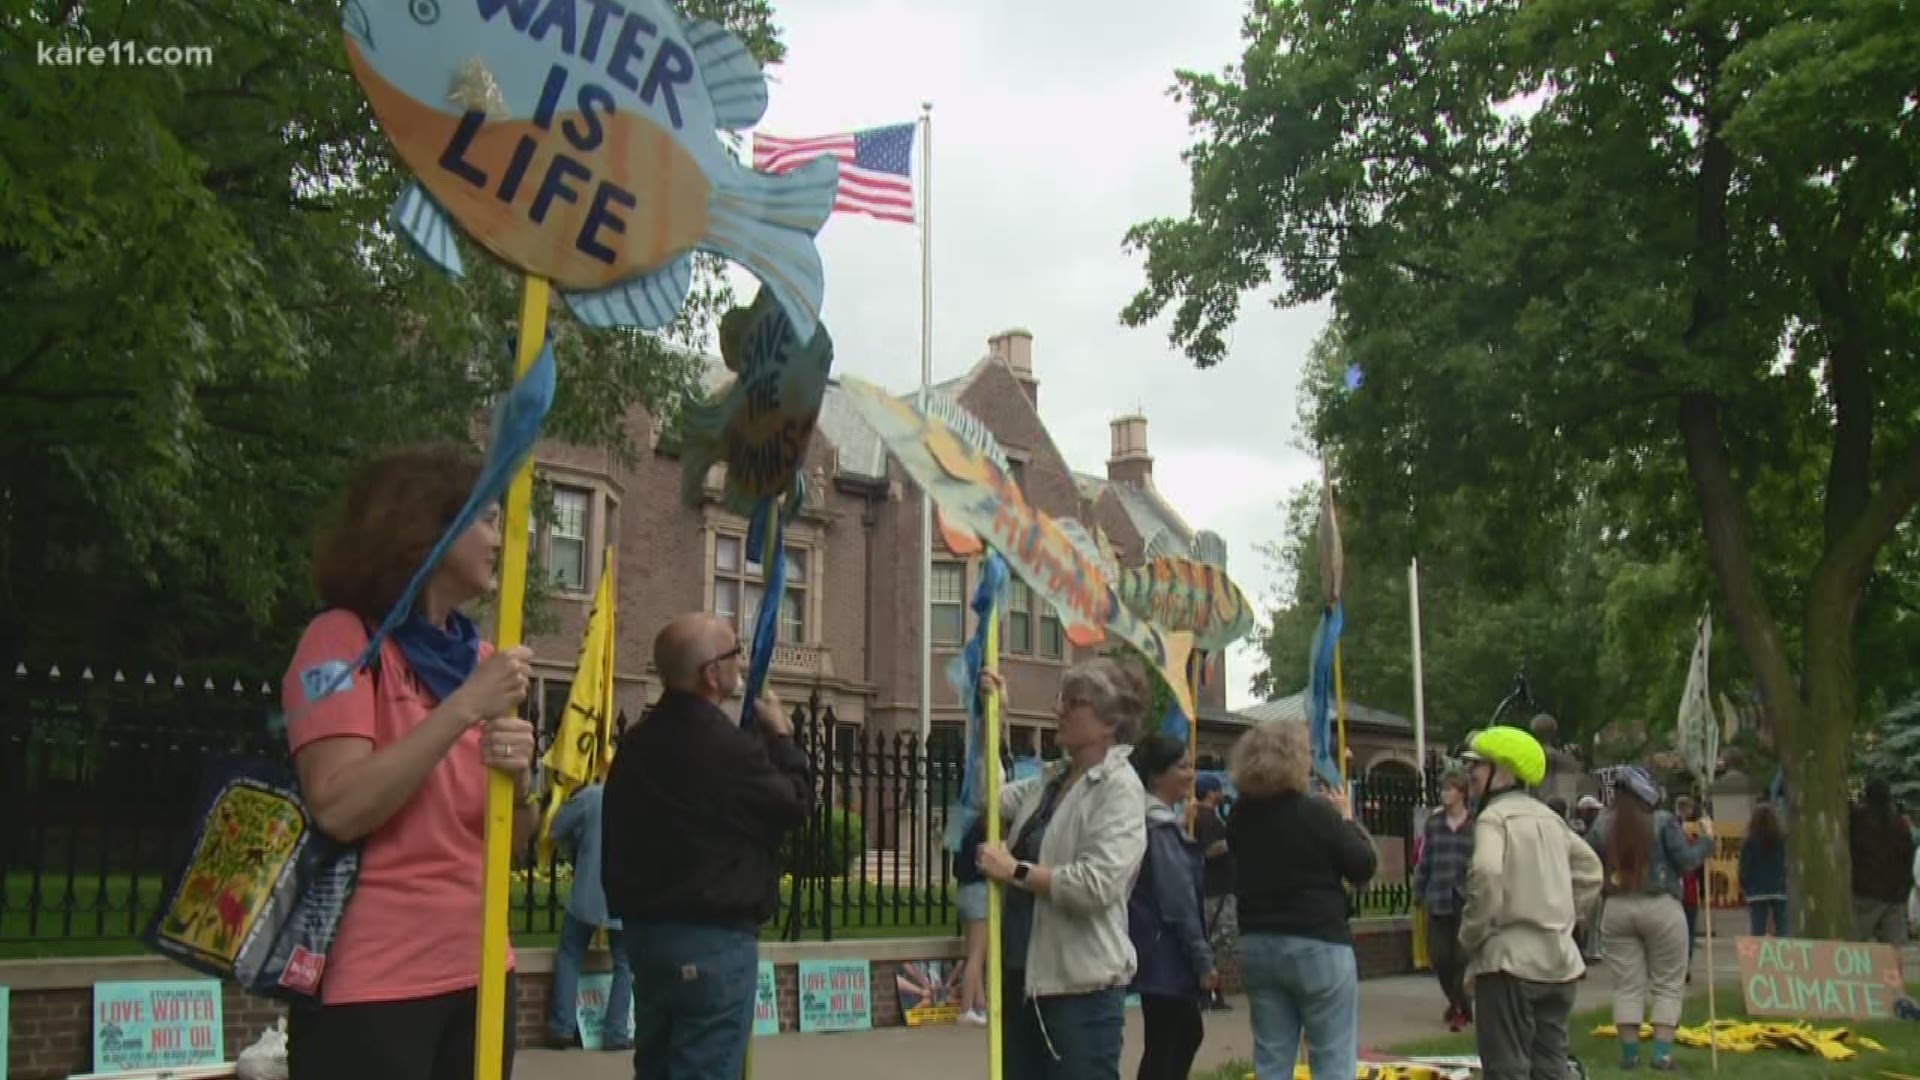 Three days after a state regulator ruled a Canadian oil company can build a pipeline across much of northern Minnesota, opponents are fighting back, rallying Sunday outside the governor's mansion in St. Paul. https://kare11.tv/2tWBJ2J